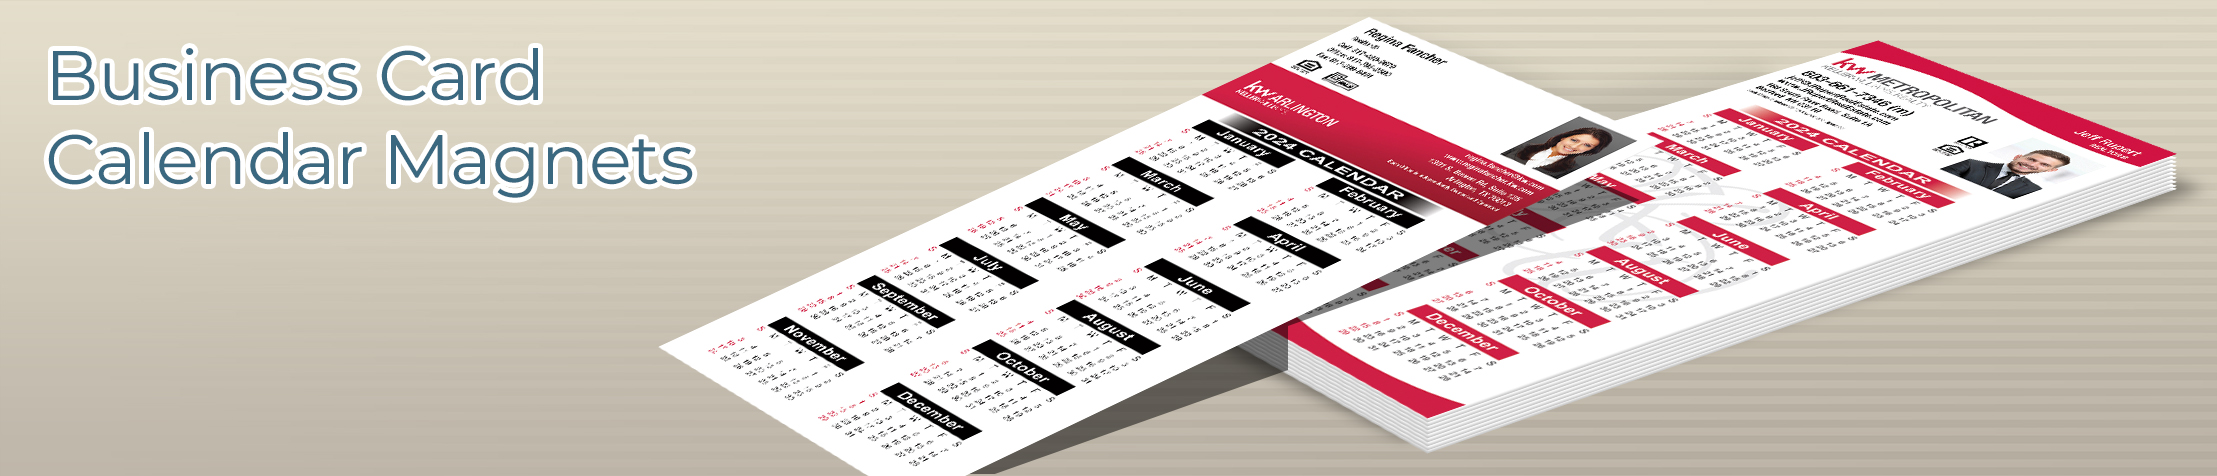 Keller Williams Real Estate Business Card Calendar Magnets - KW approved vendor 2019 calendars with photo and contact info | BestPrintBuy.com